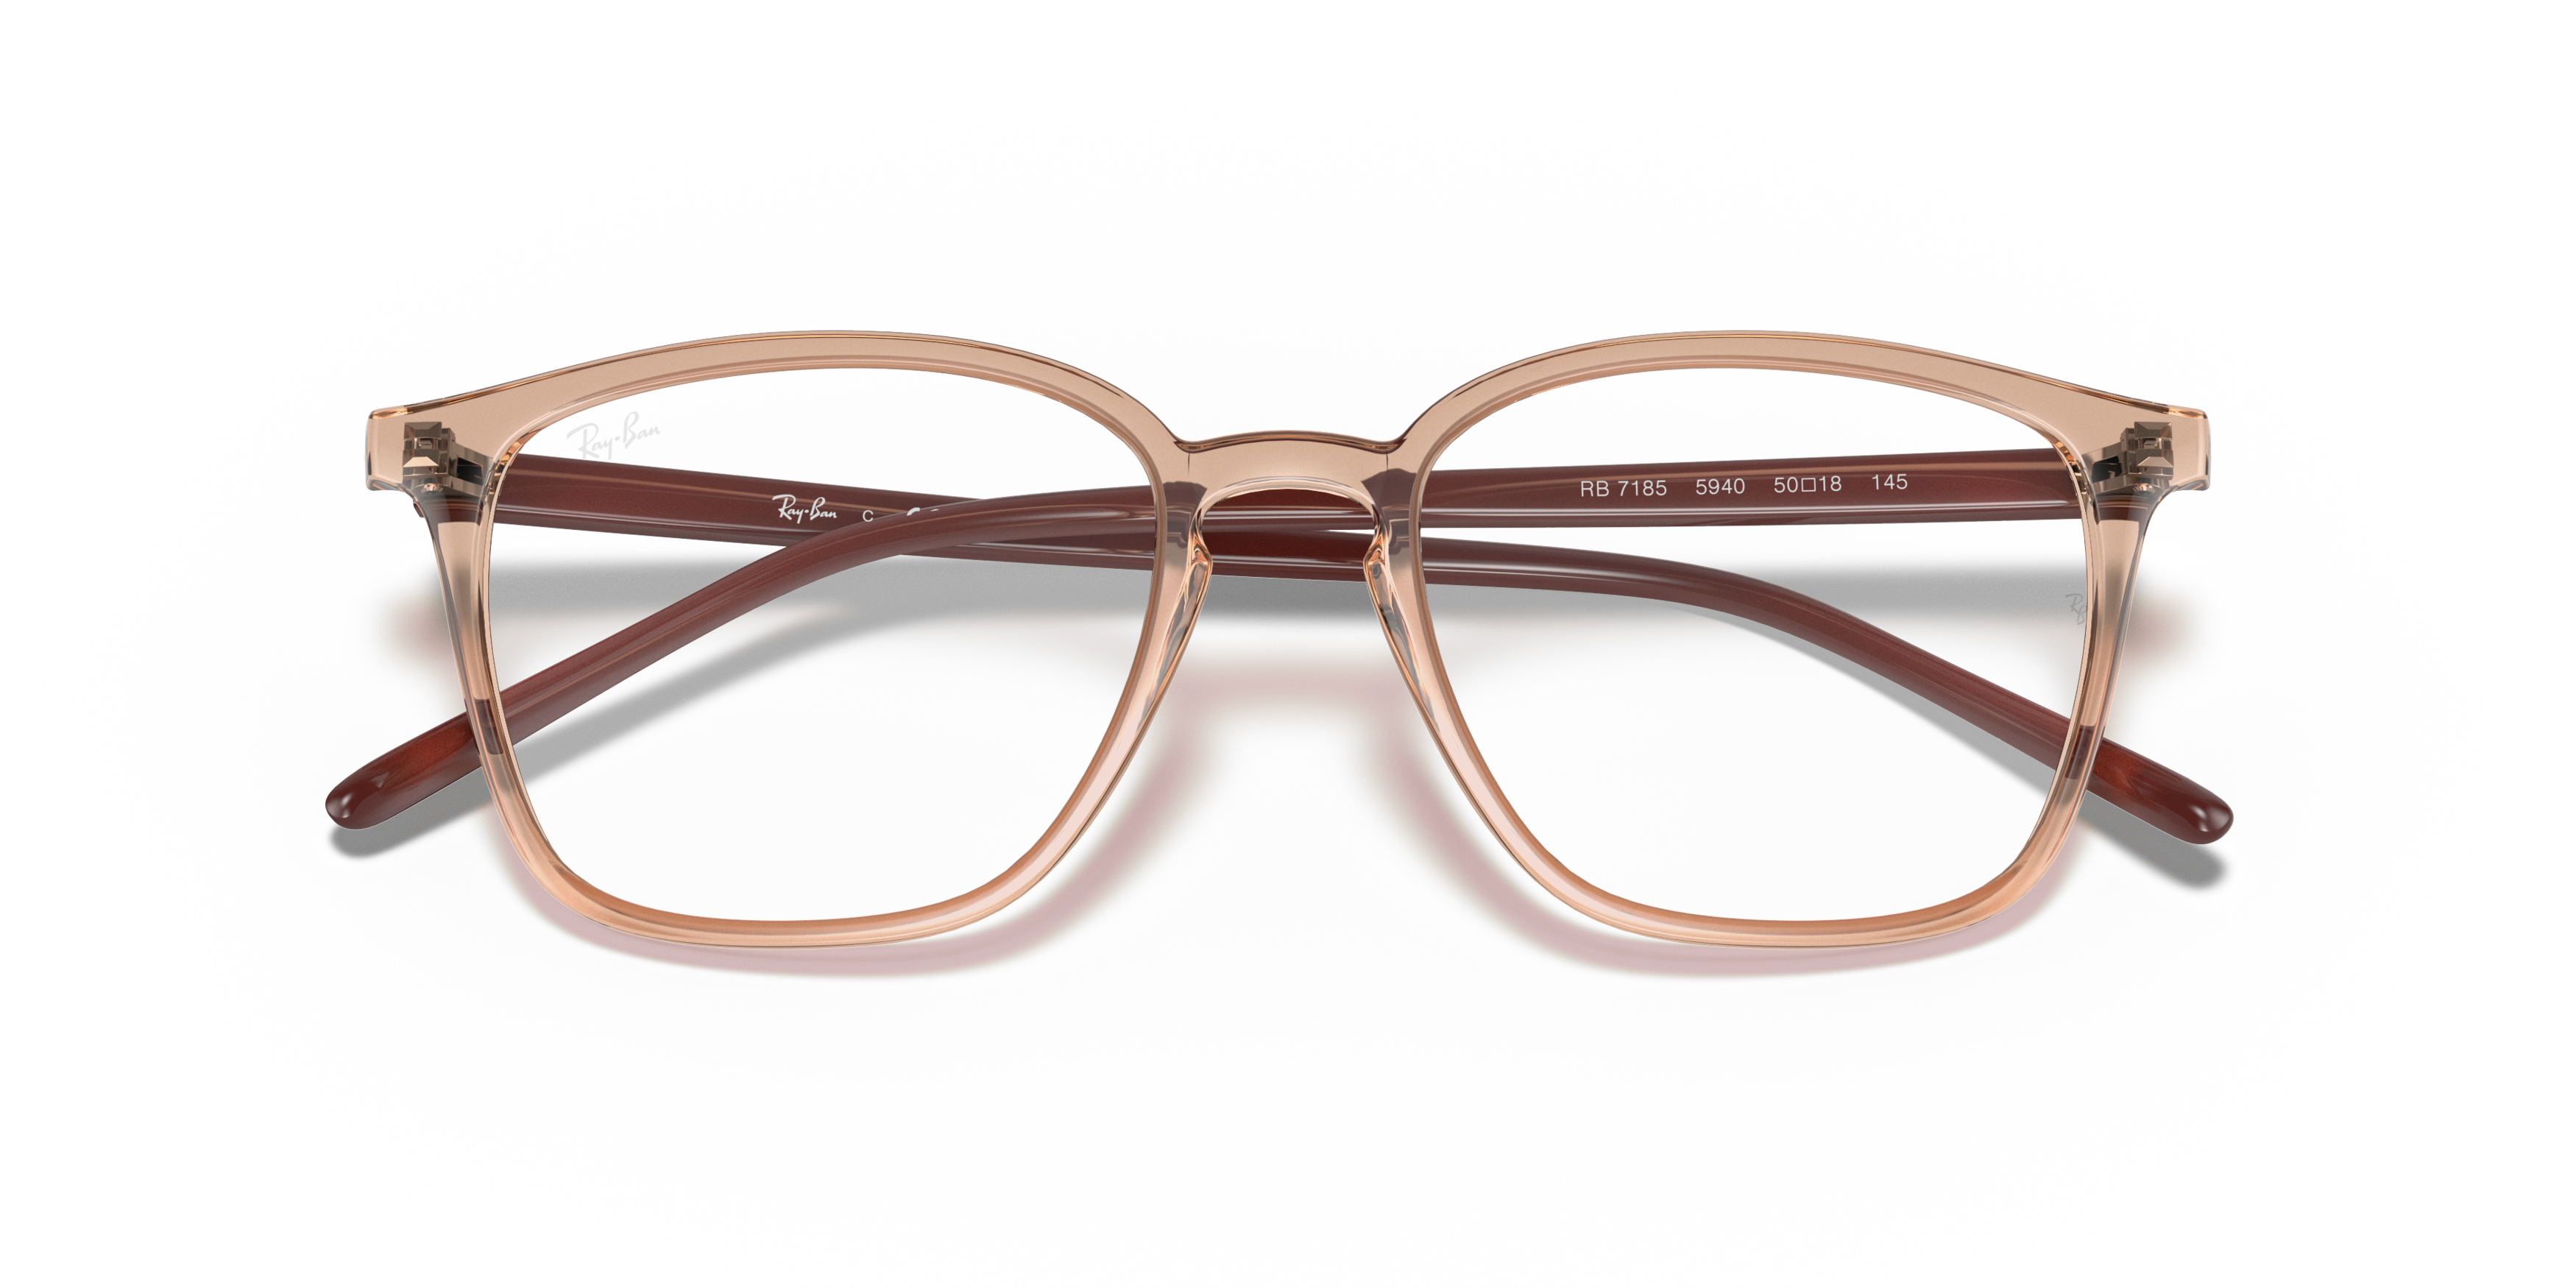 Folded Ray-Ban RX 7185 (5940) Glasses Transparent / Brown